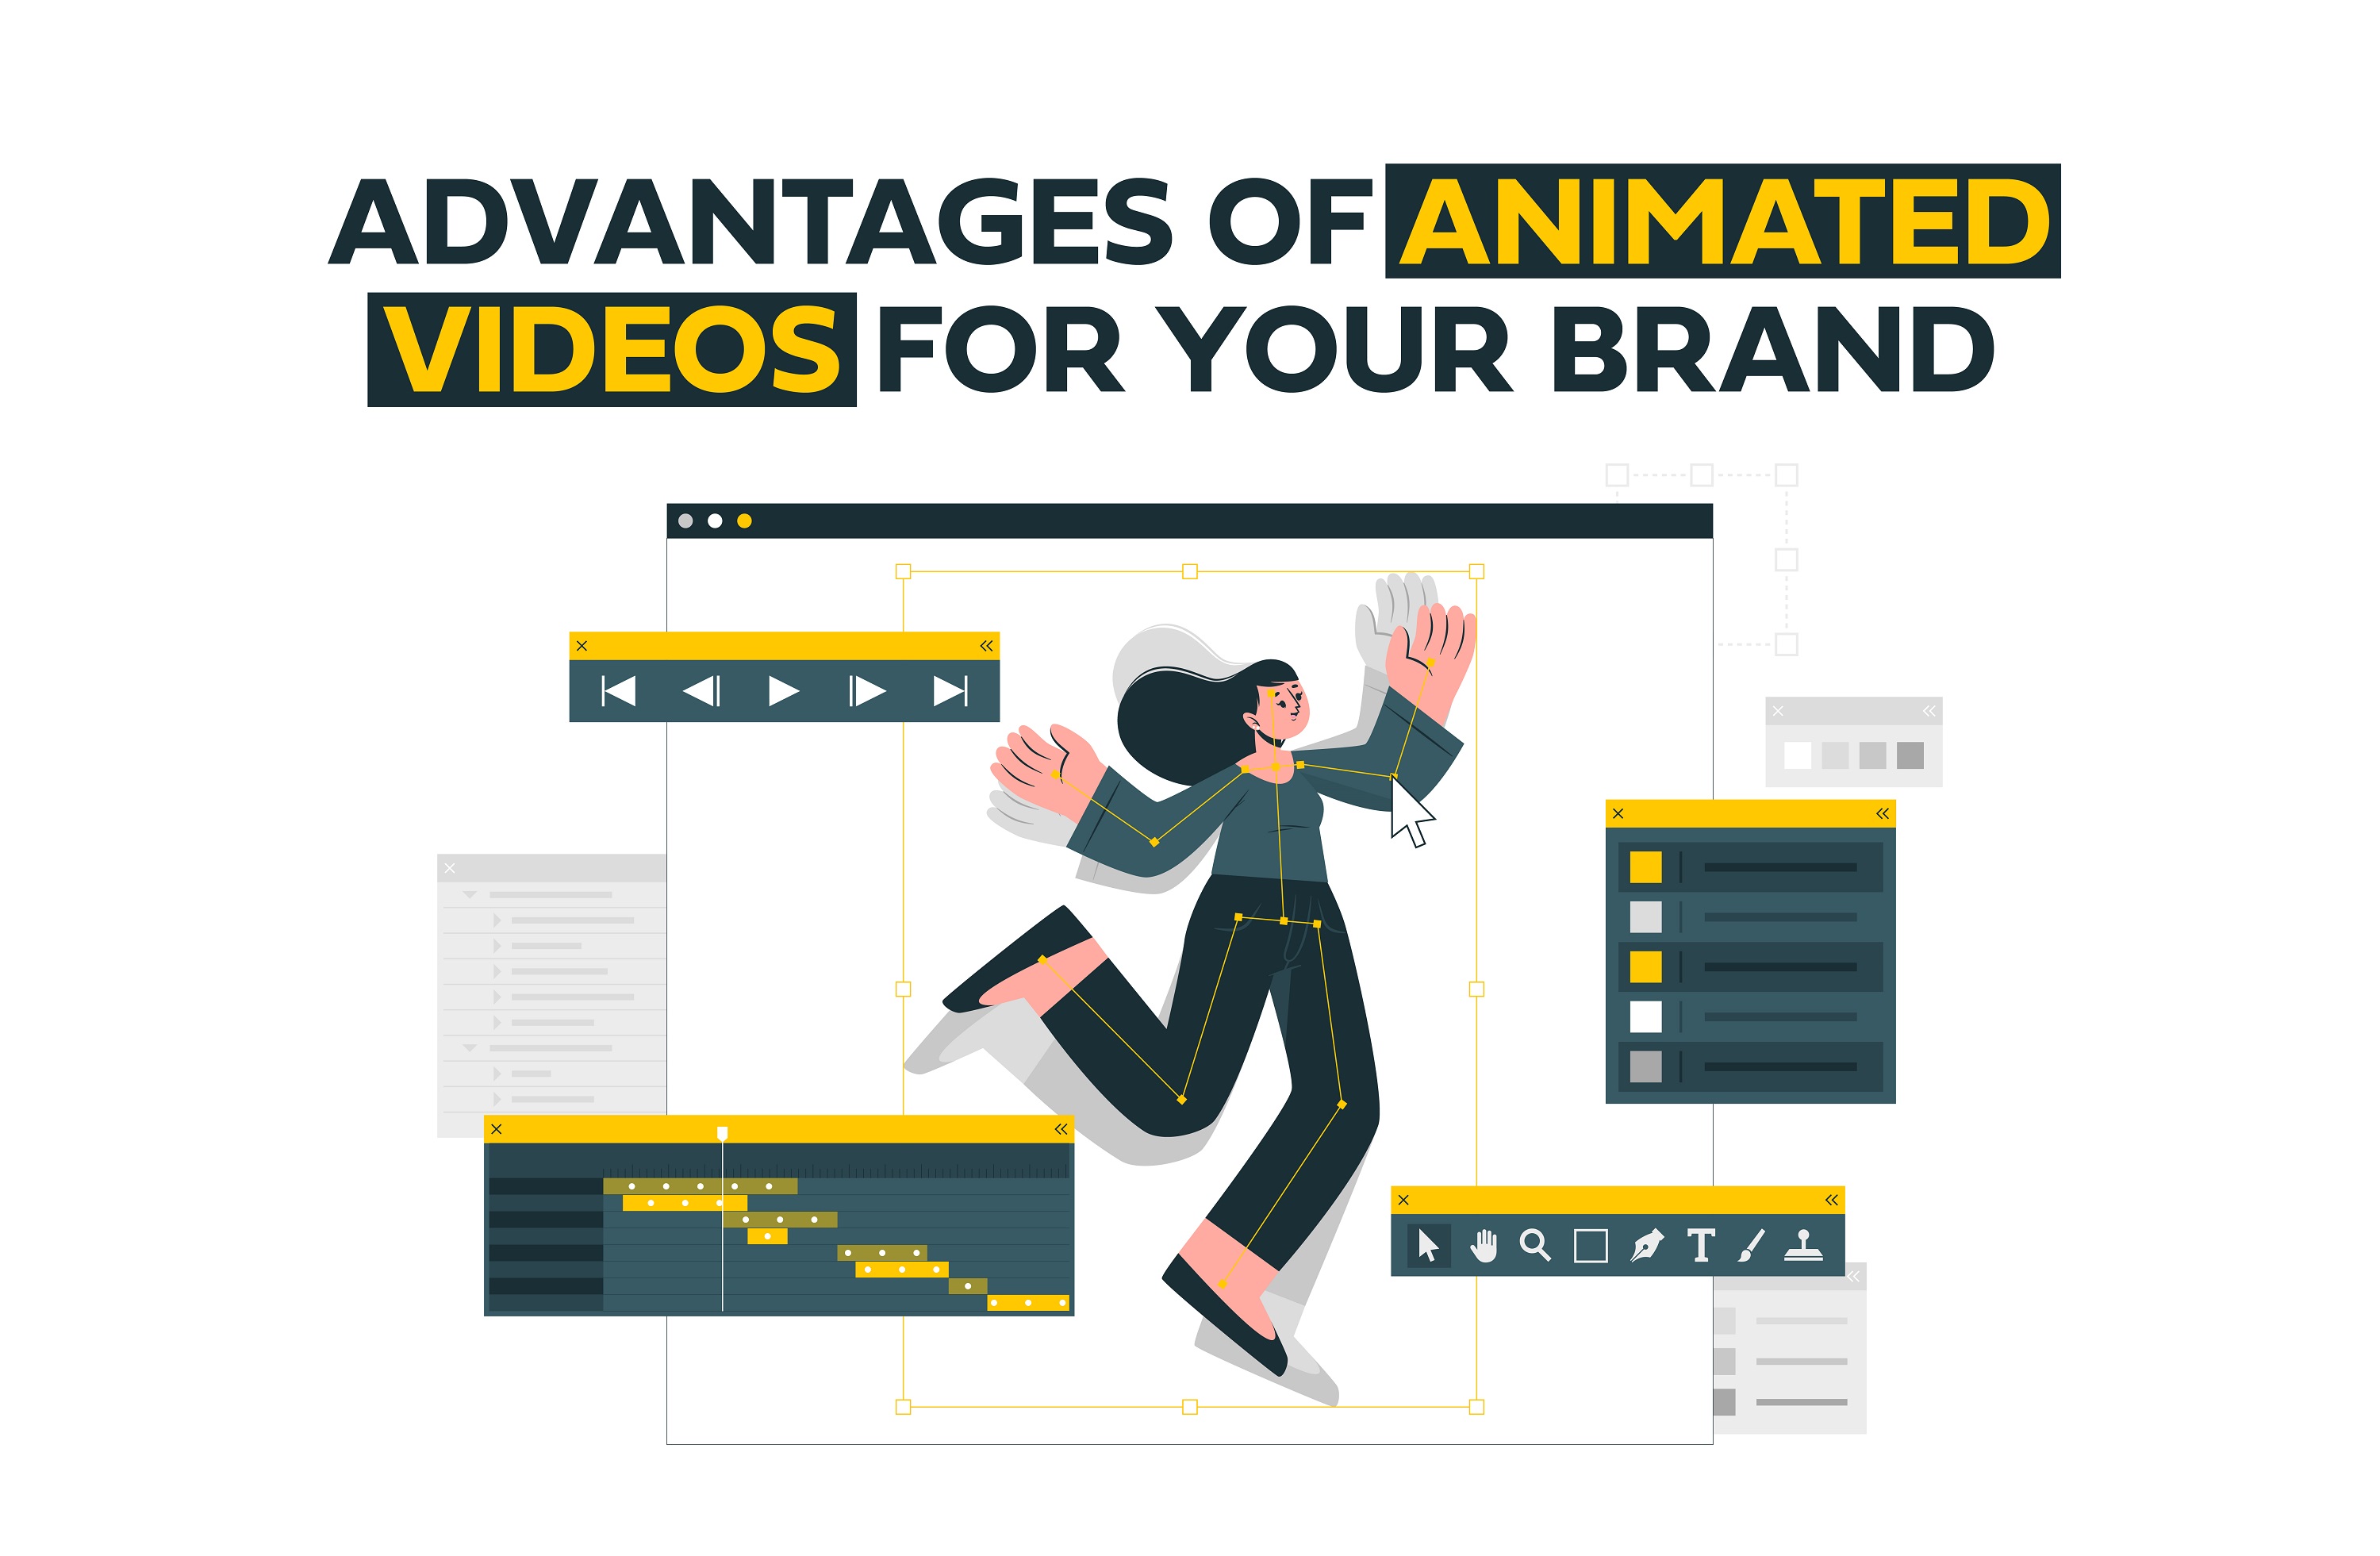 How Can Animated Videos Benefit Your Brand?